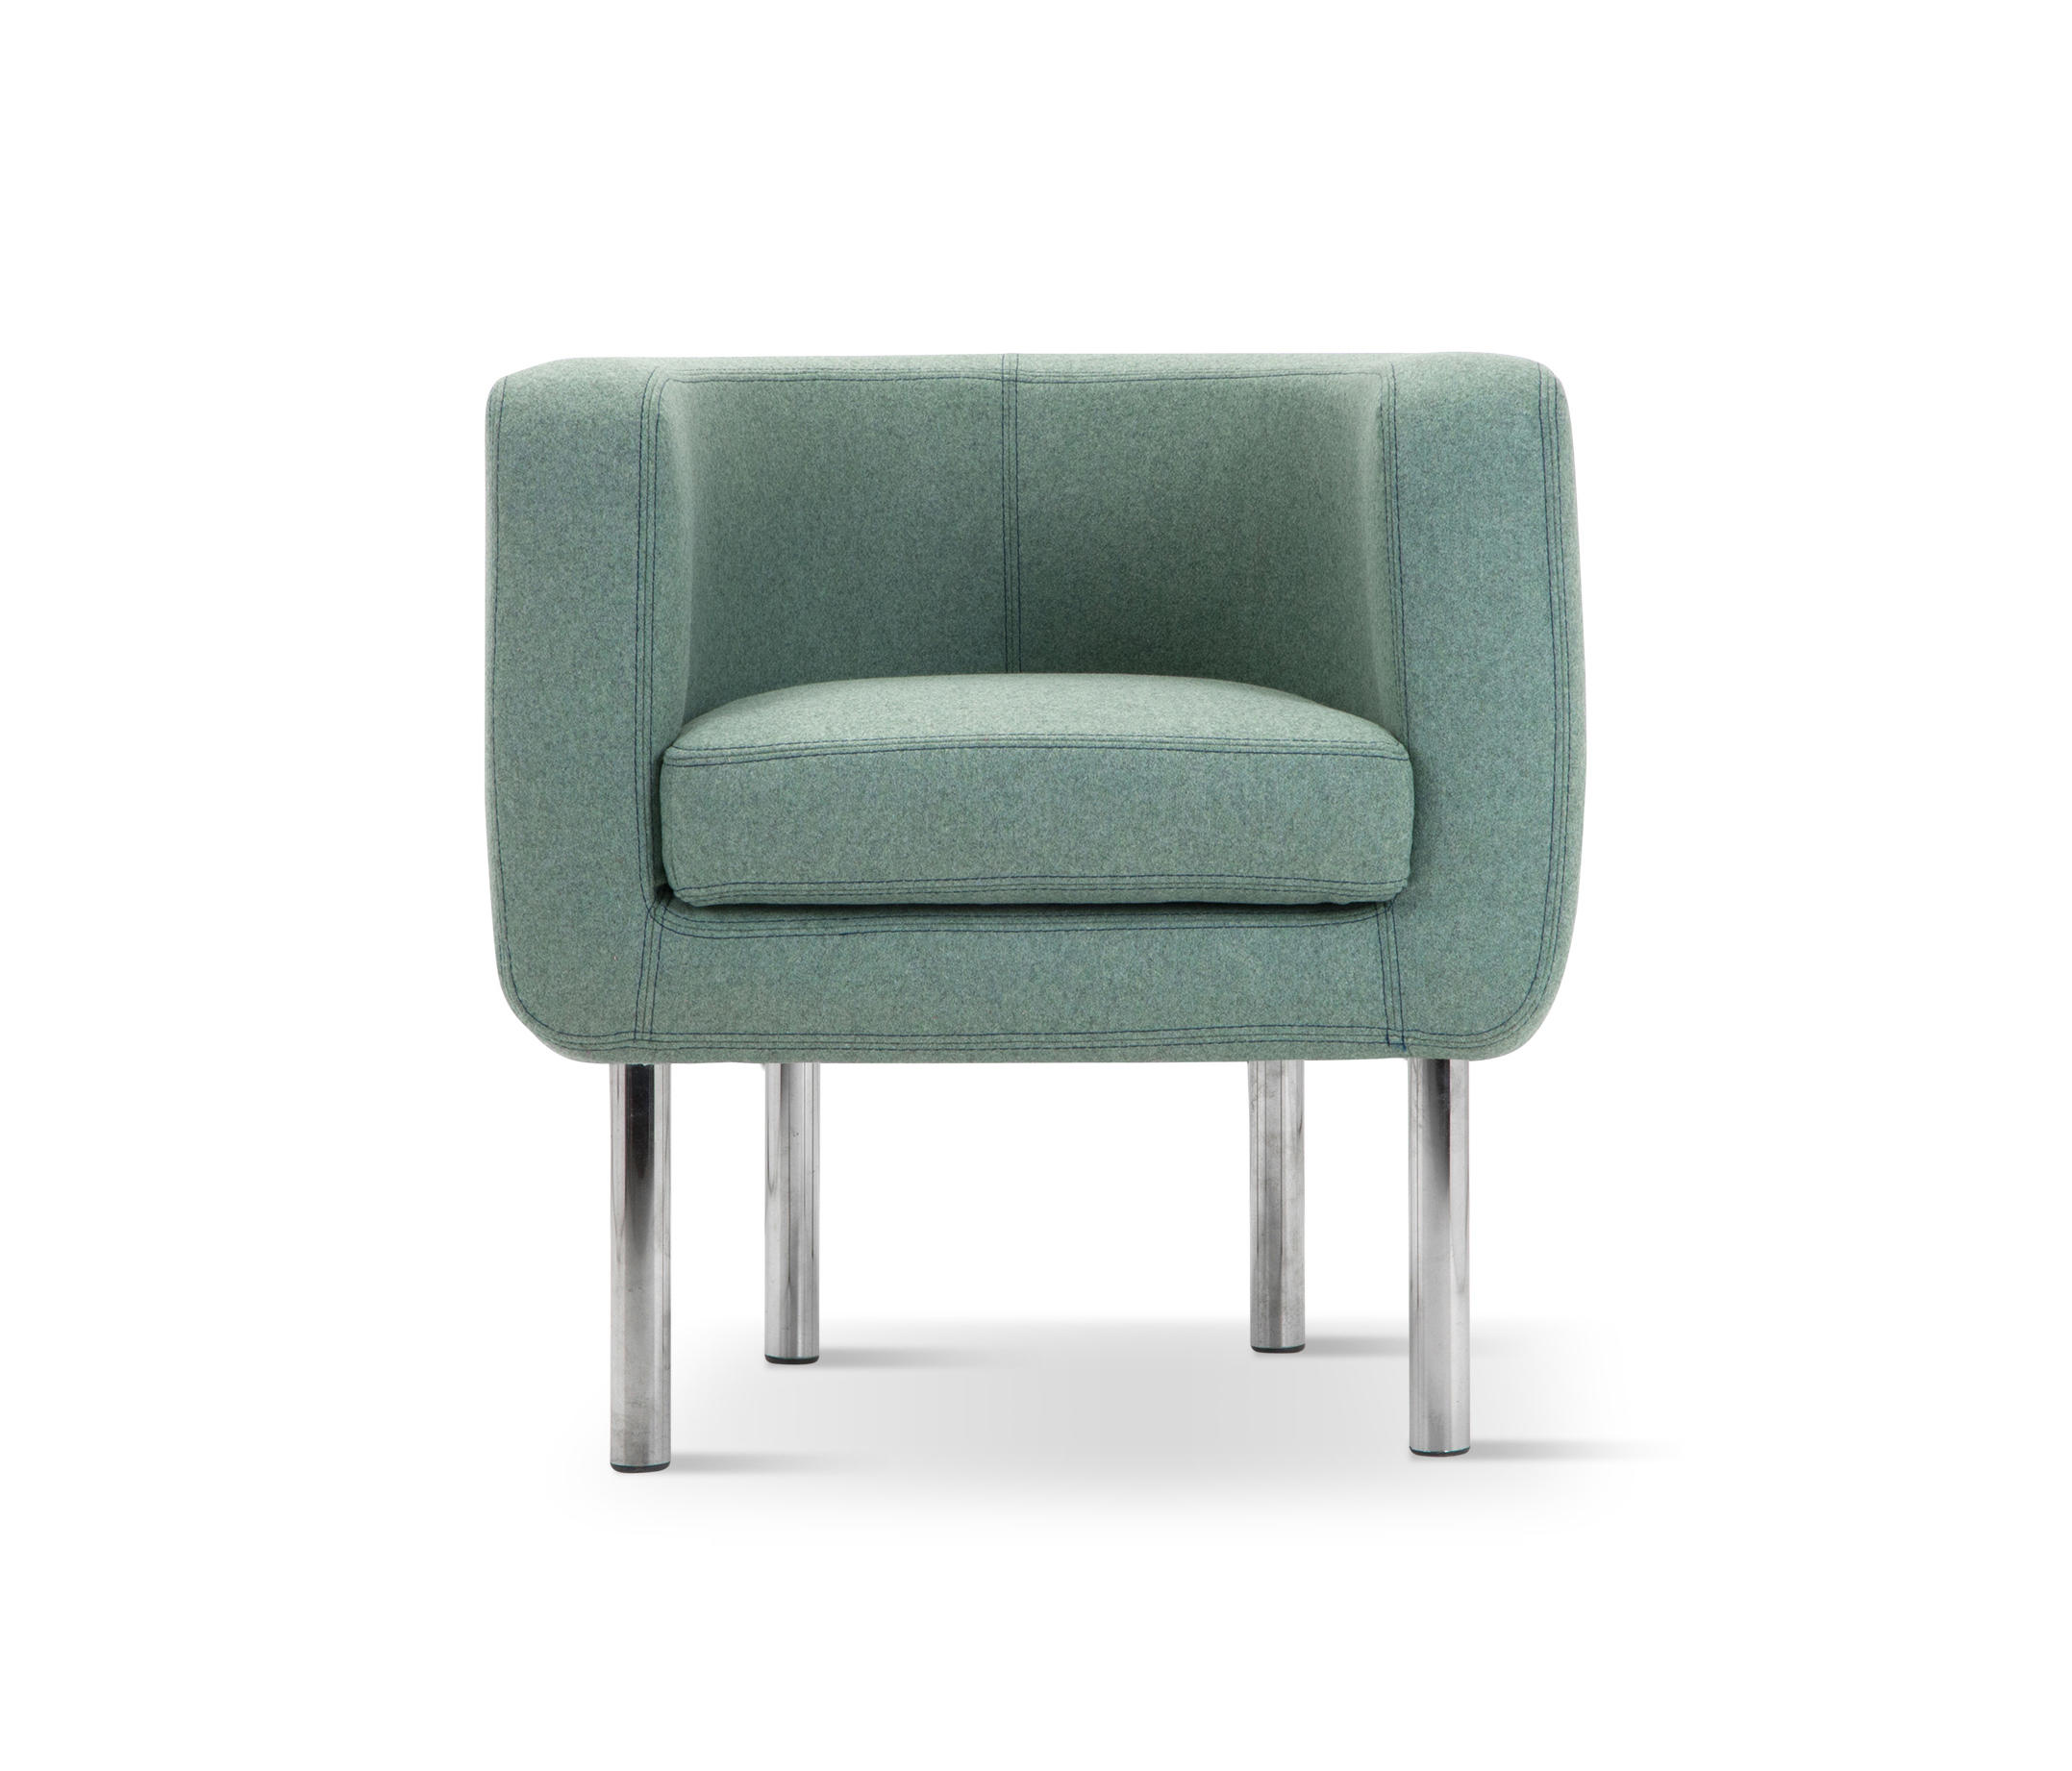 OTTO - Armchairs from Adrenalina